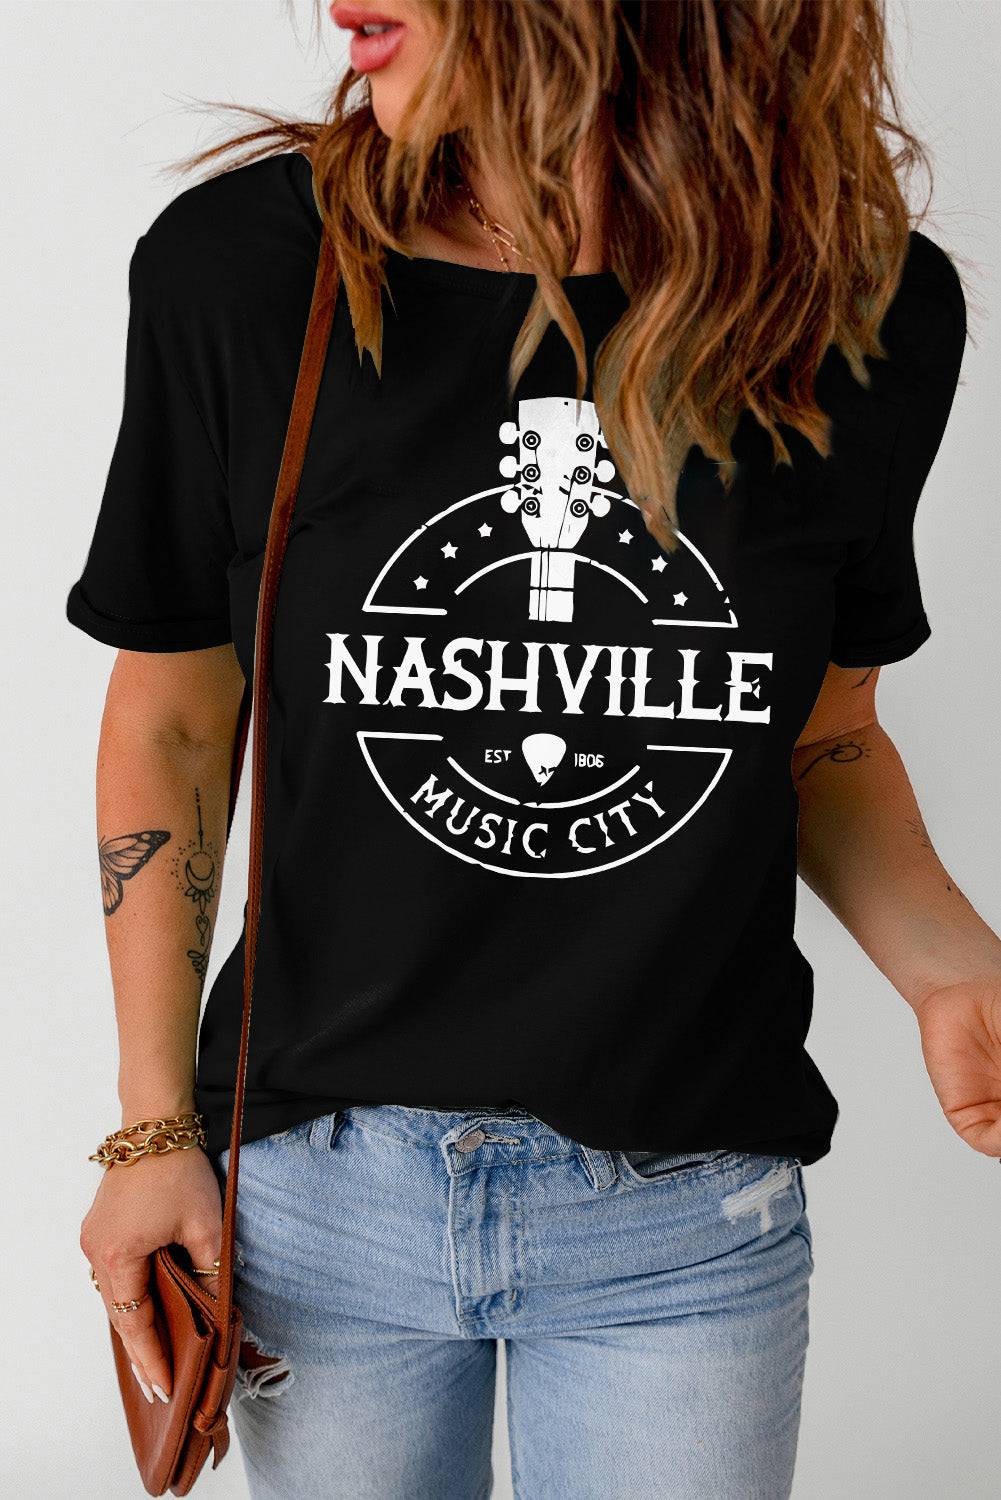 Captivate Your Heart with the Western Nashville Music City Cuffed Graphic Tee Shirt - Embrace the Beauty of Nashville's Western Culture and Experience Sublime Comfort All Day Long. - Guy Christopher